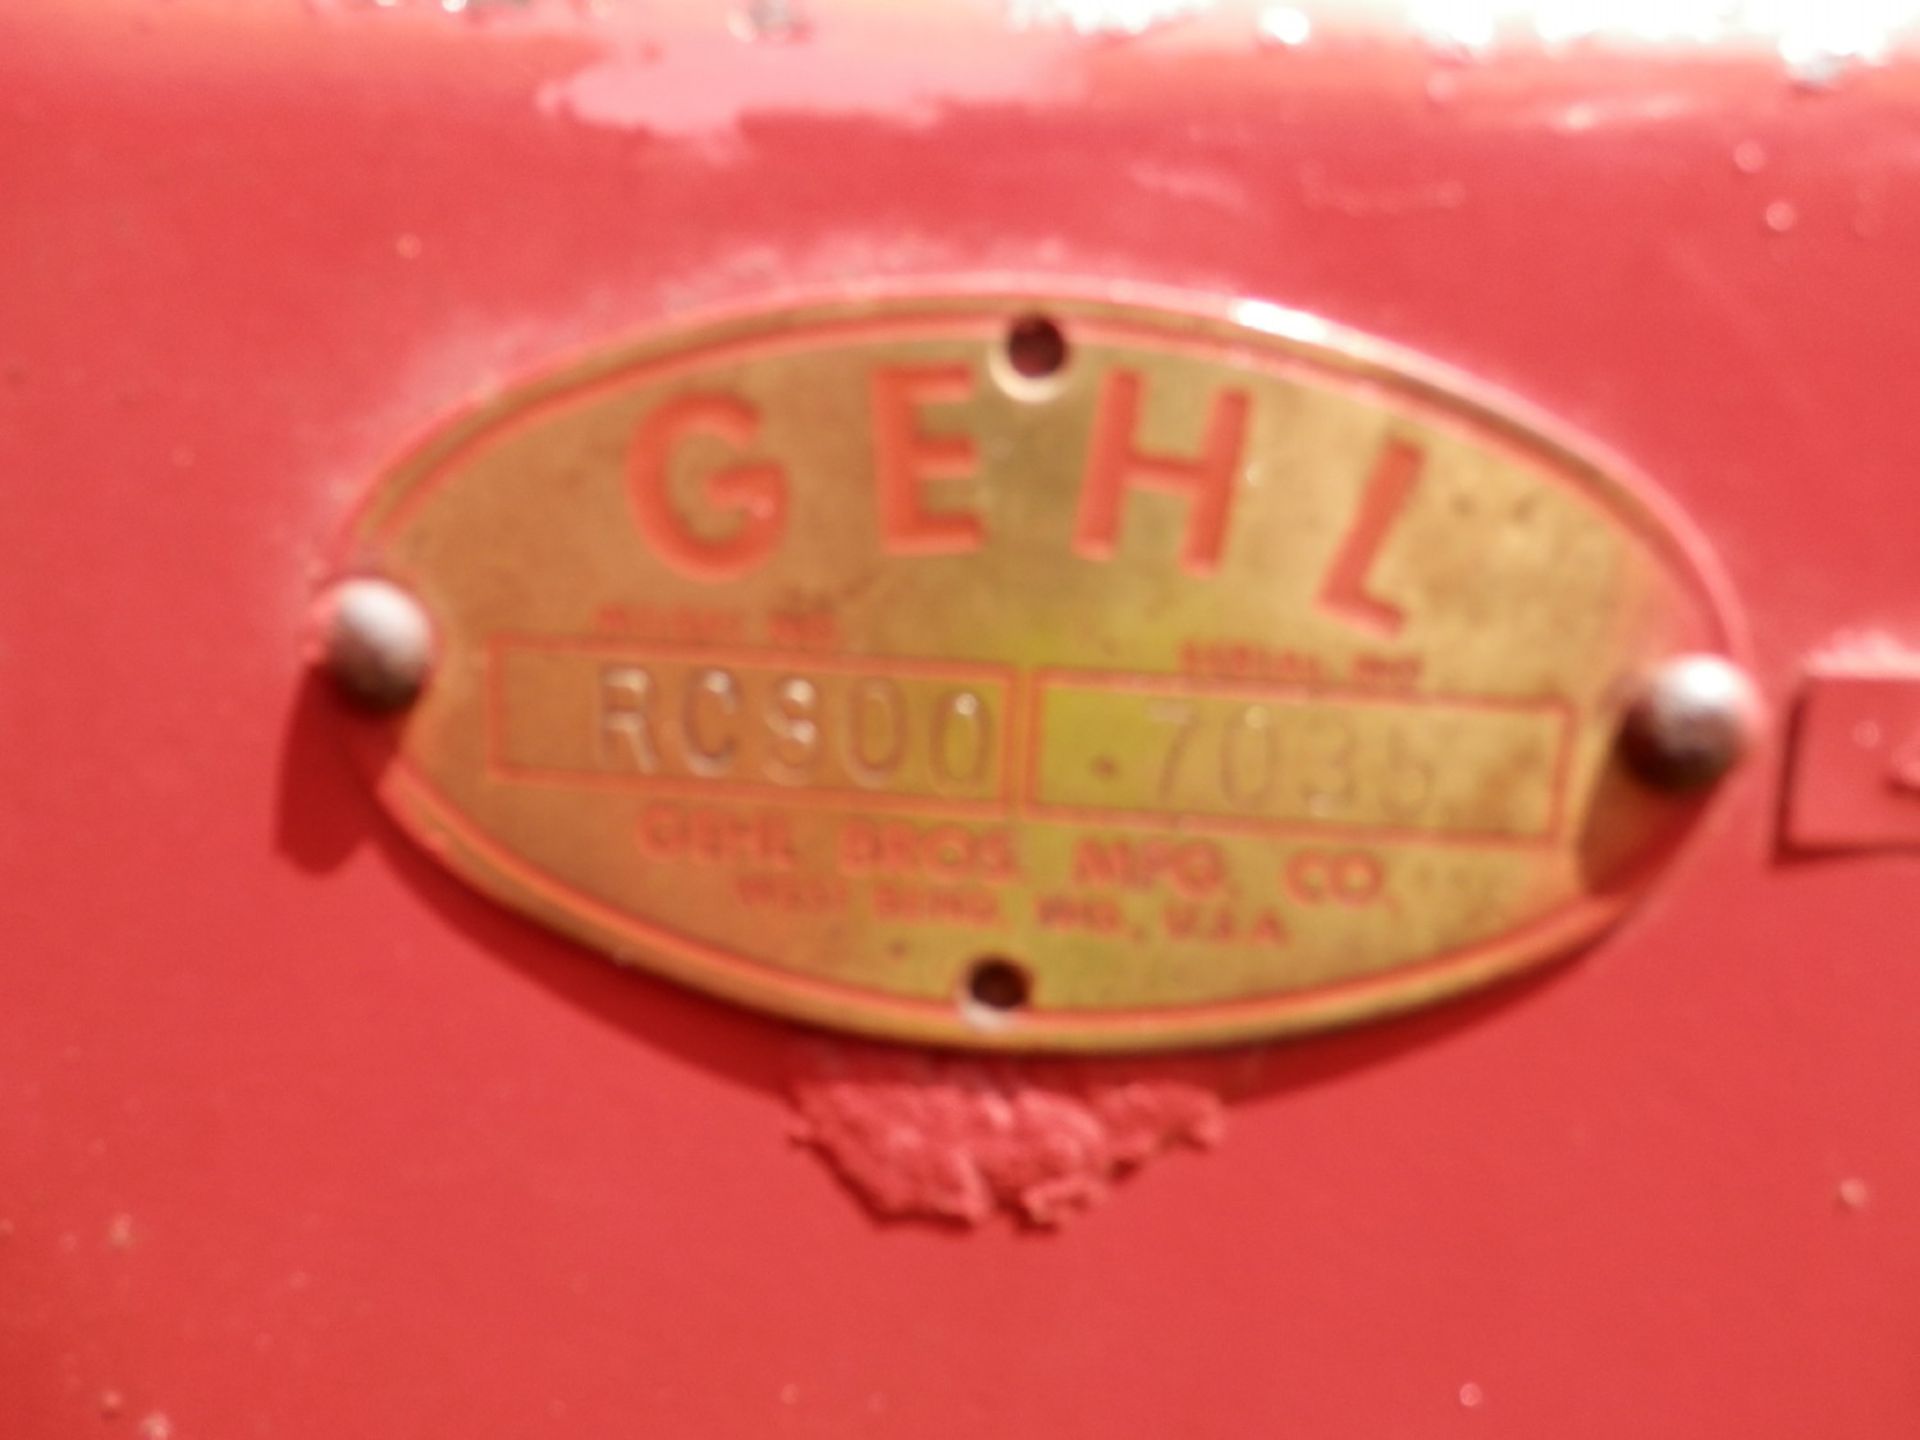 GEHL RC800 RECUTTER BLOWER - Image 6 of 6